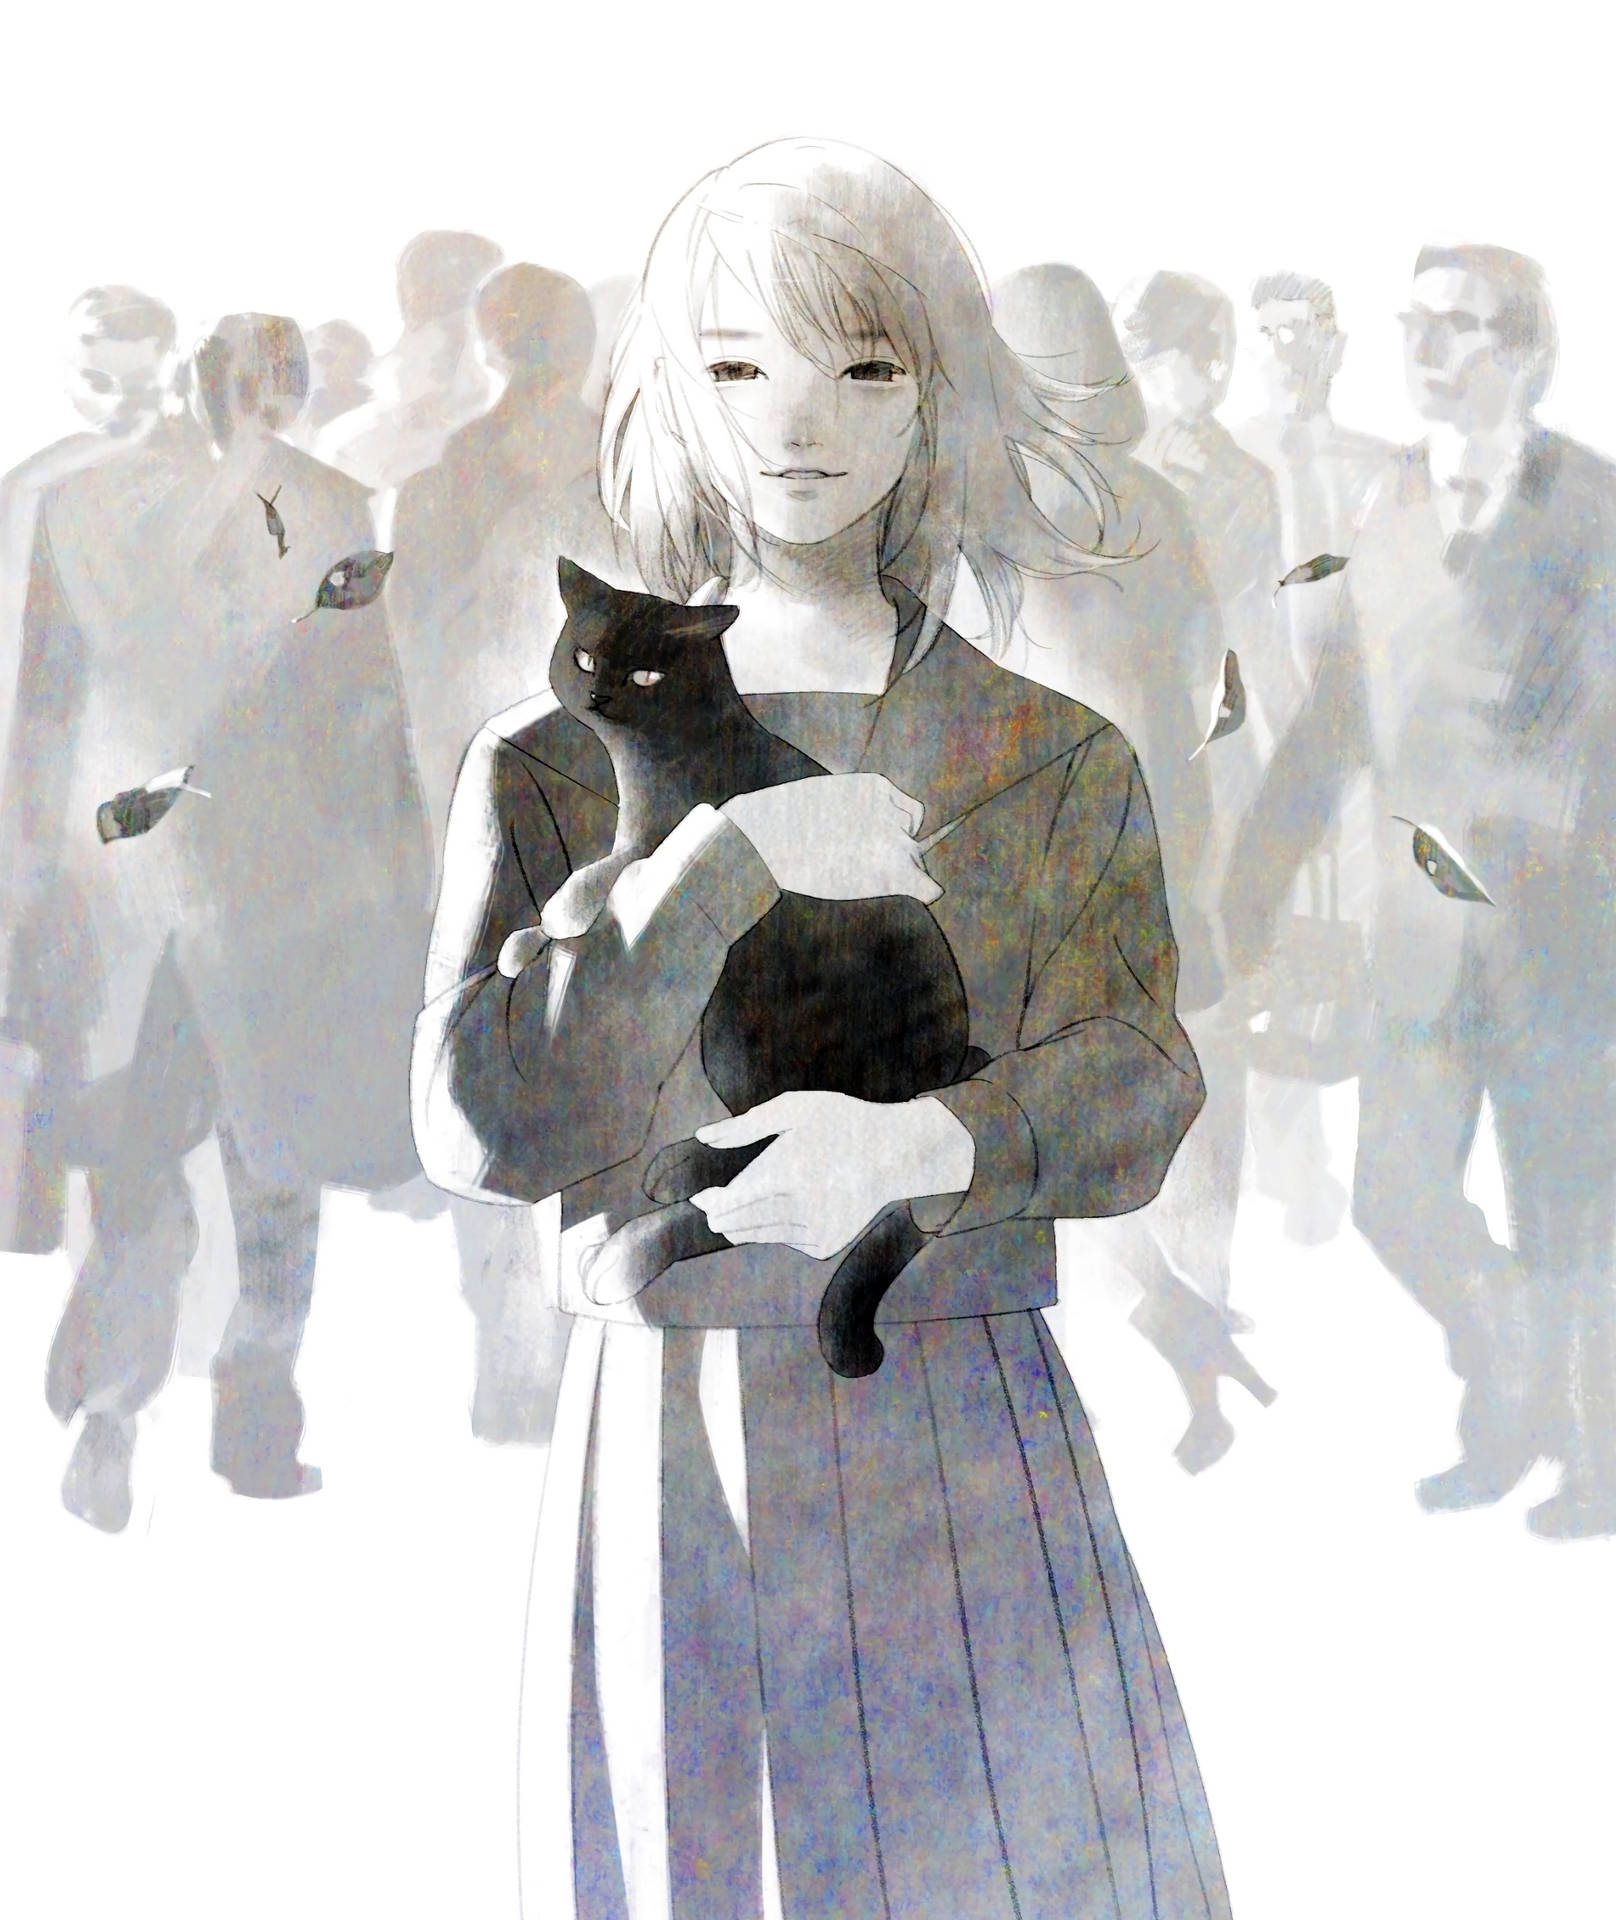 Grey woman carrying a black cat with silhouette background, animated HD wallpaper.